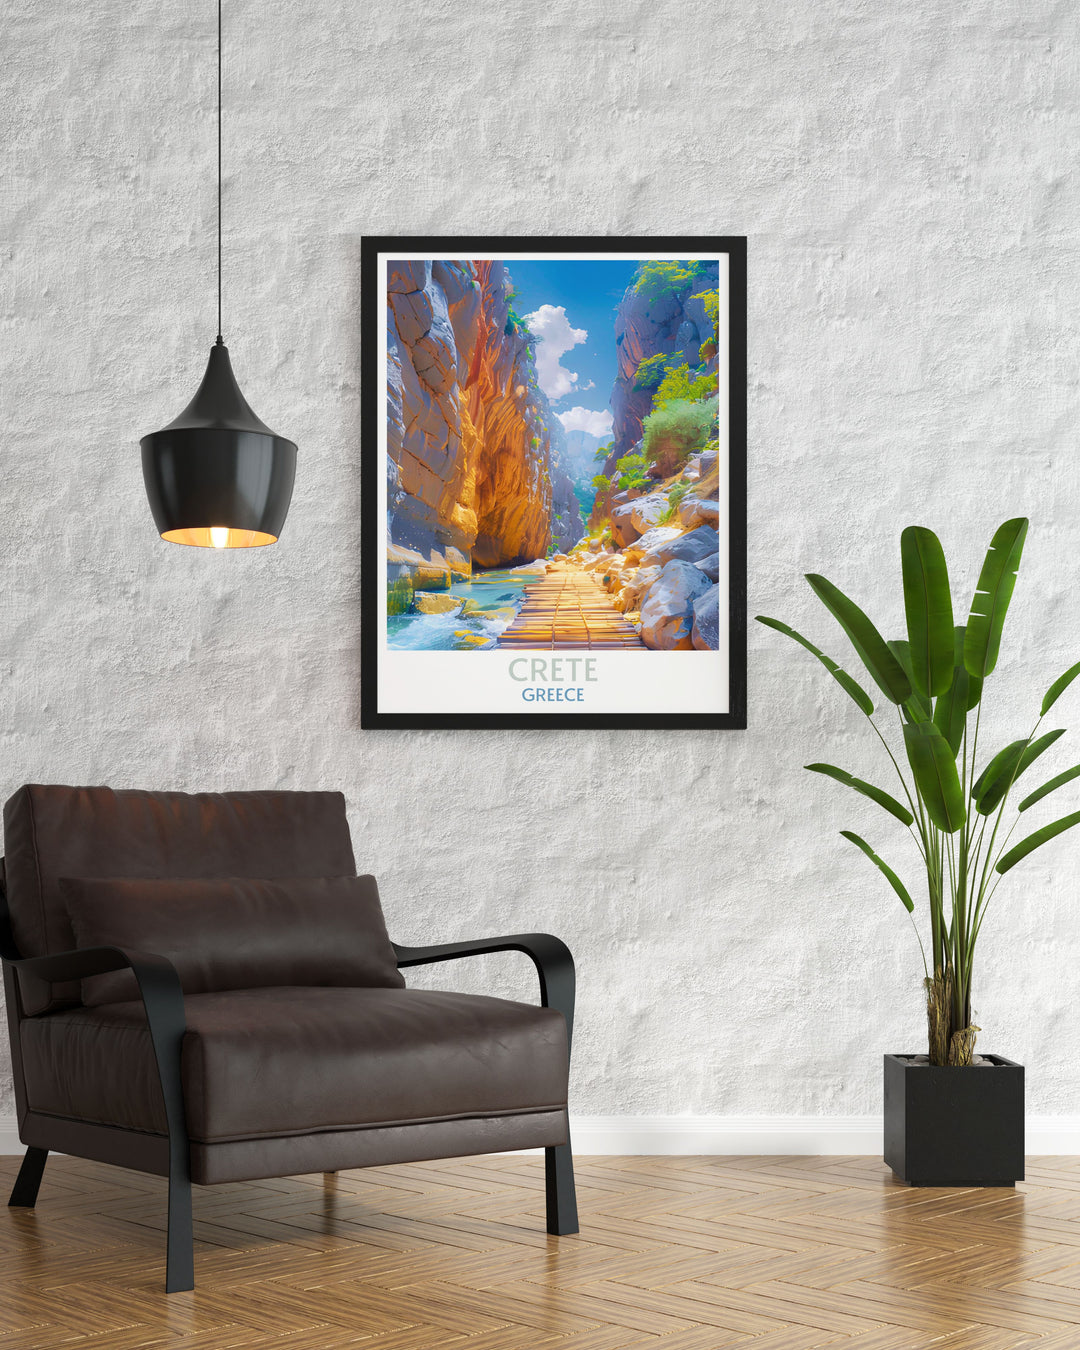 High resolution print featuring the breathtaking landscapes of Samaria Gorge, ideal for those who appreciate the natural beauty of Crete.